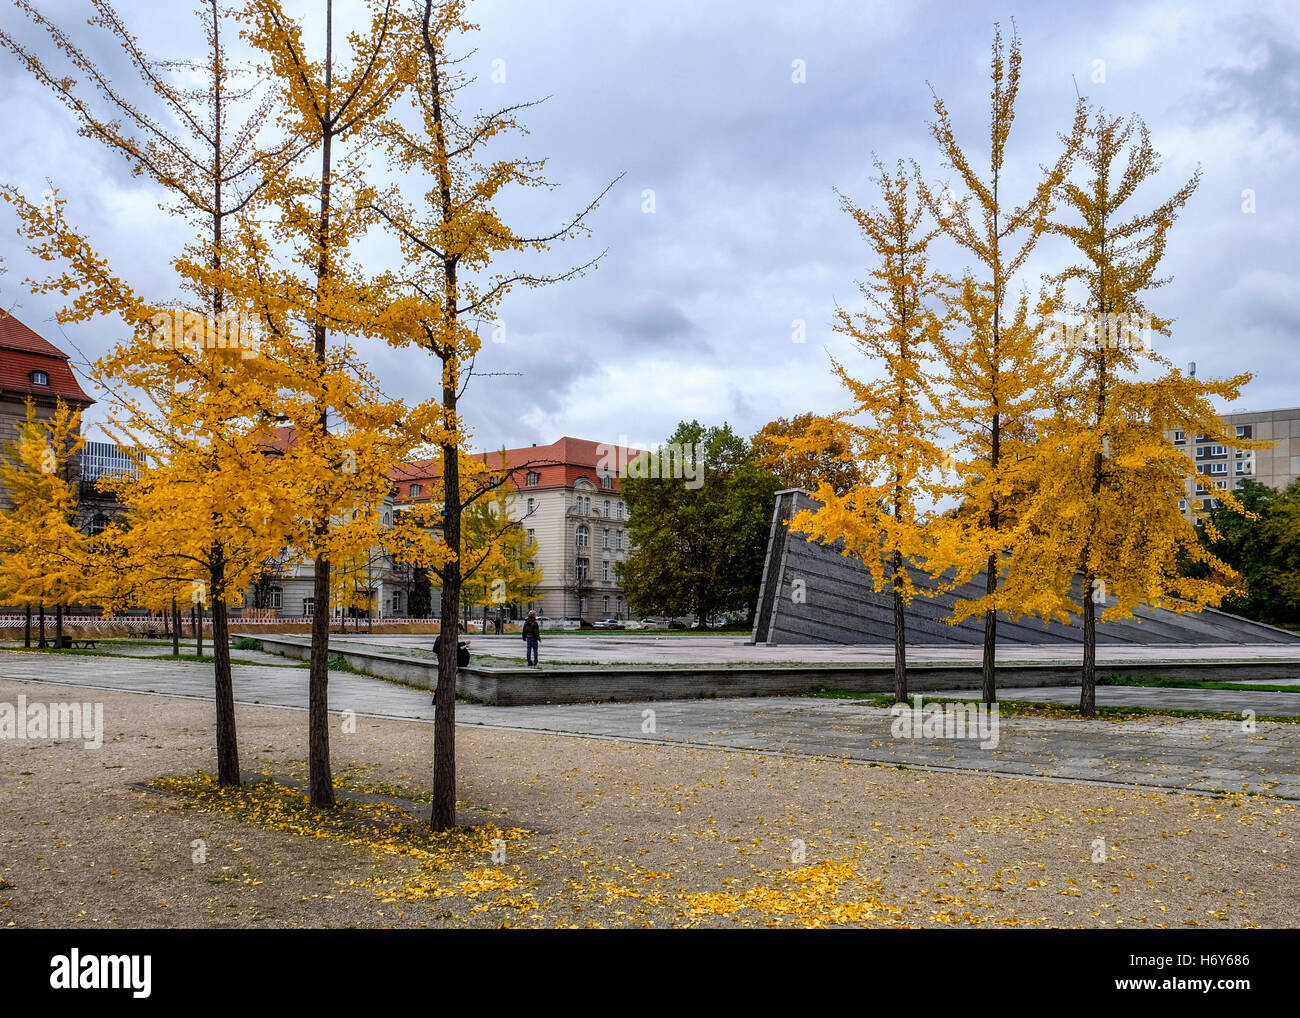 Invalidenpark with Sinking Wall monumental sculpture with fountain & pond by Christophe Girot and yellow maidenhair trees in Autumn, Mitte Berlin. Stock Photo